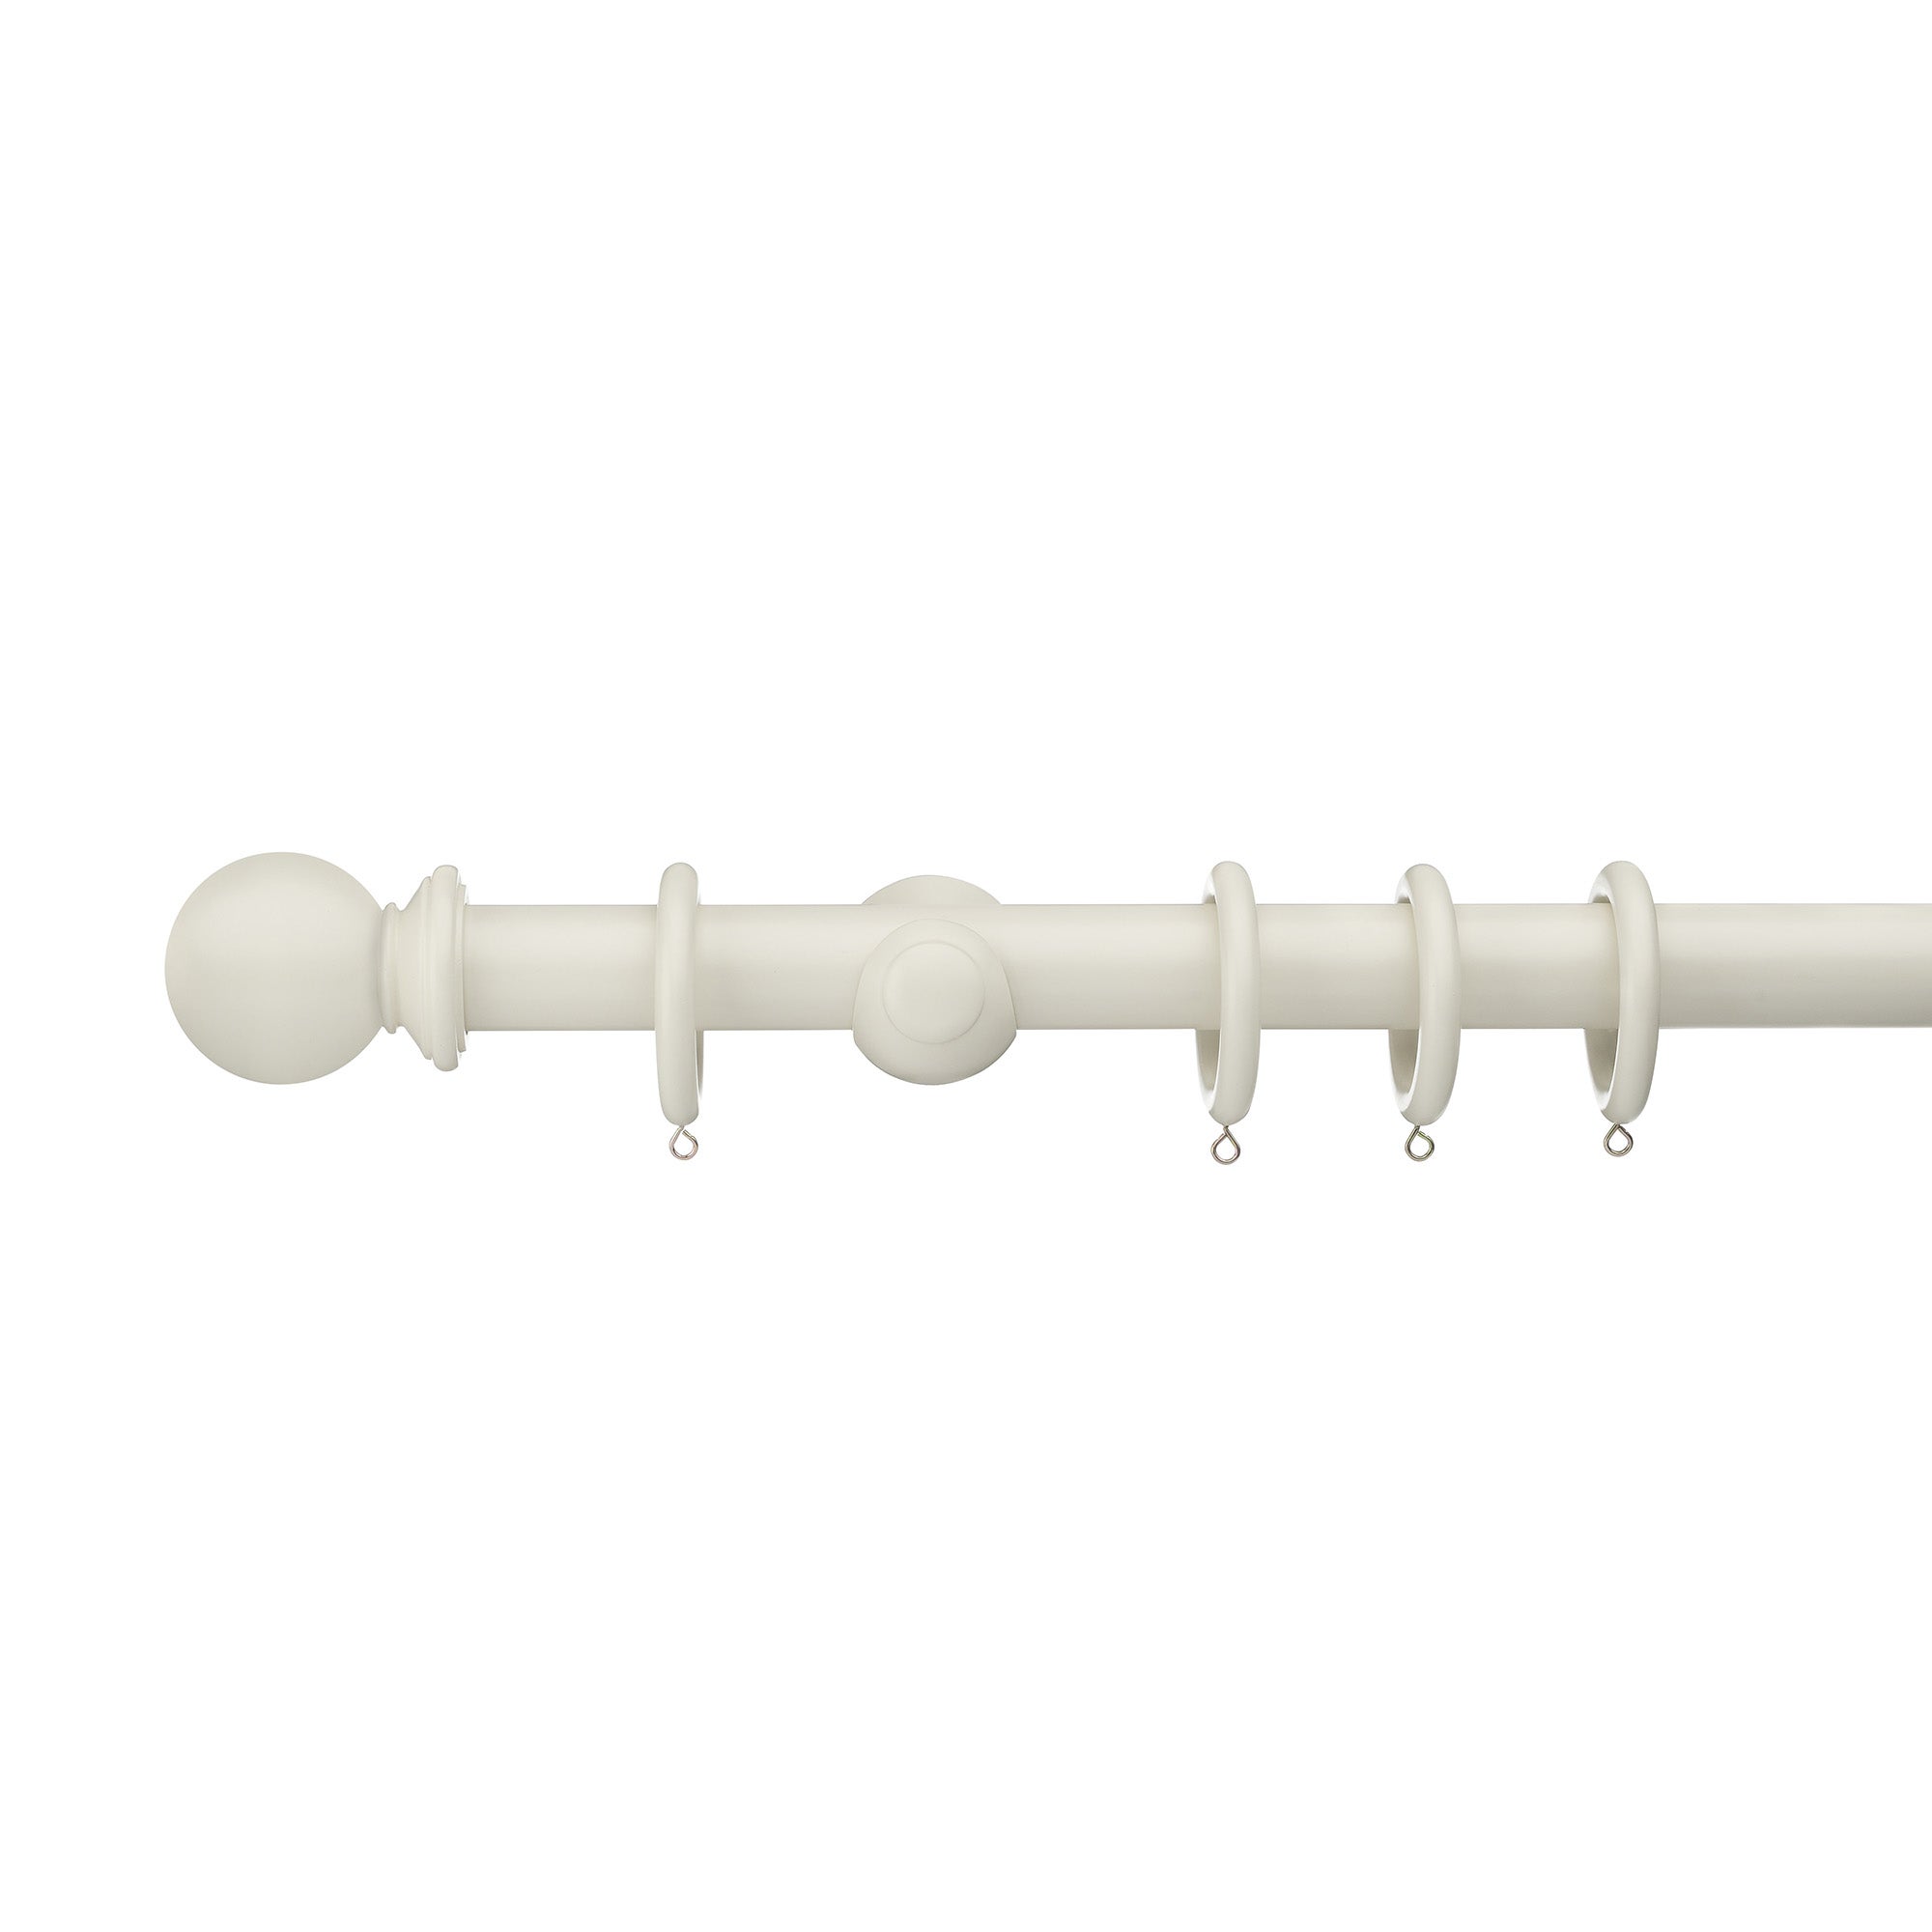 Sherwood Ball Finial Painted Wooden Curtain Pole Grey